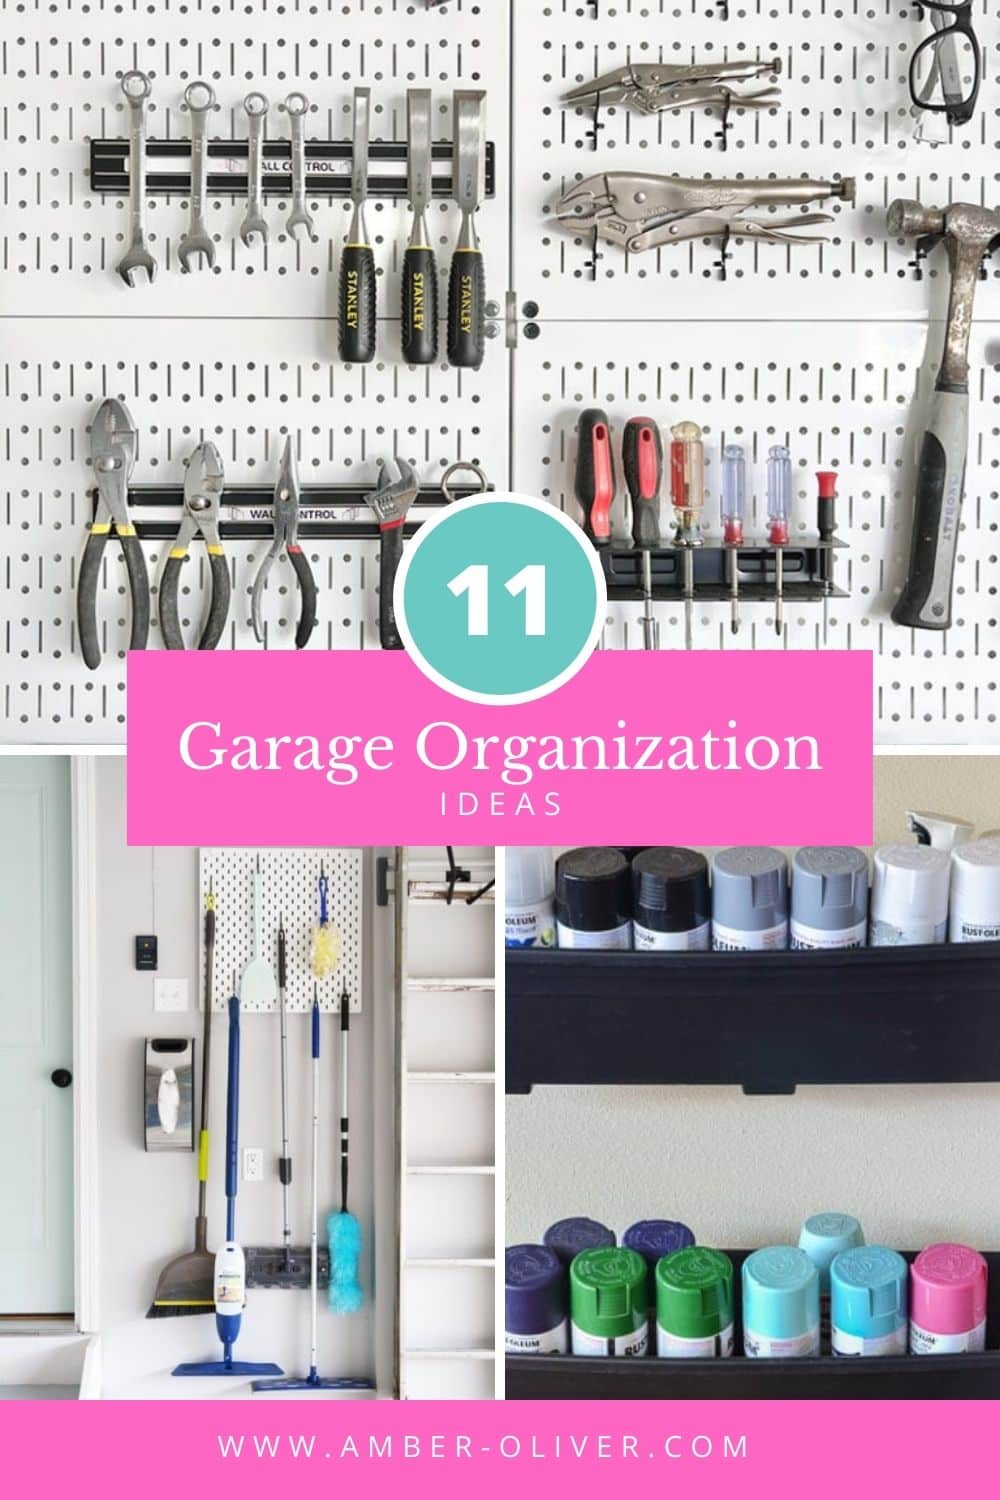 collage of garage organization ideas with text overlay